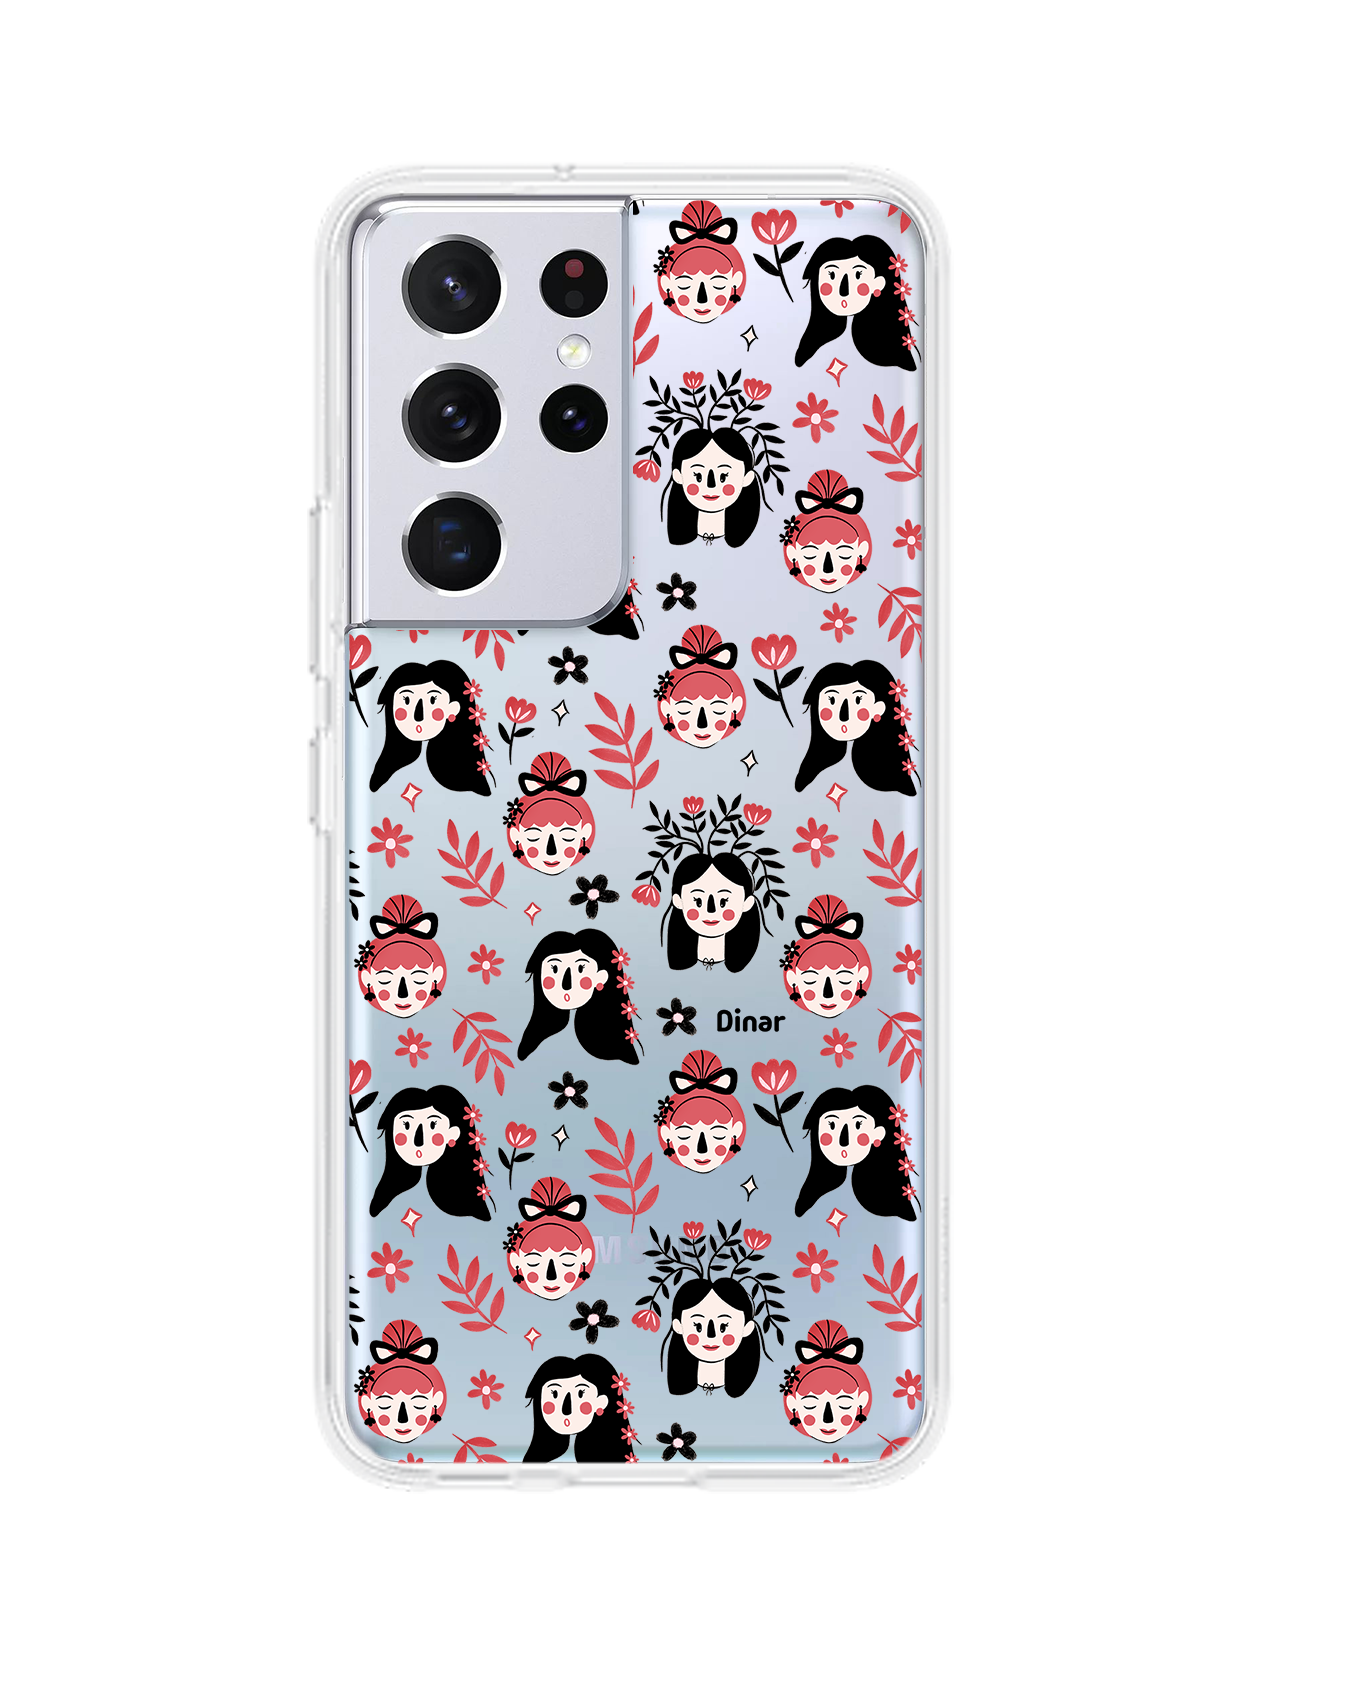 Android Rearguard Hybrid Case - Flowery Faces